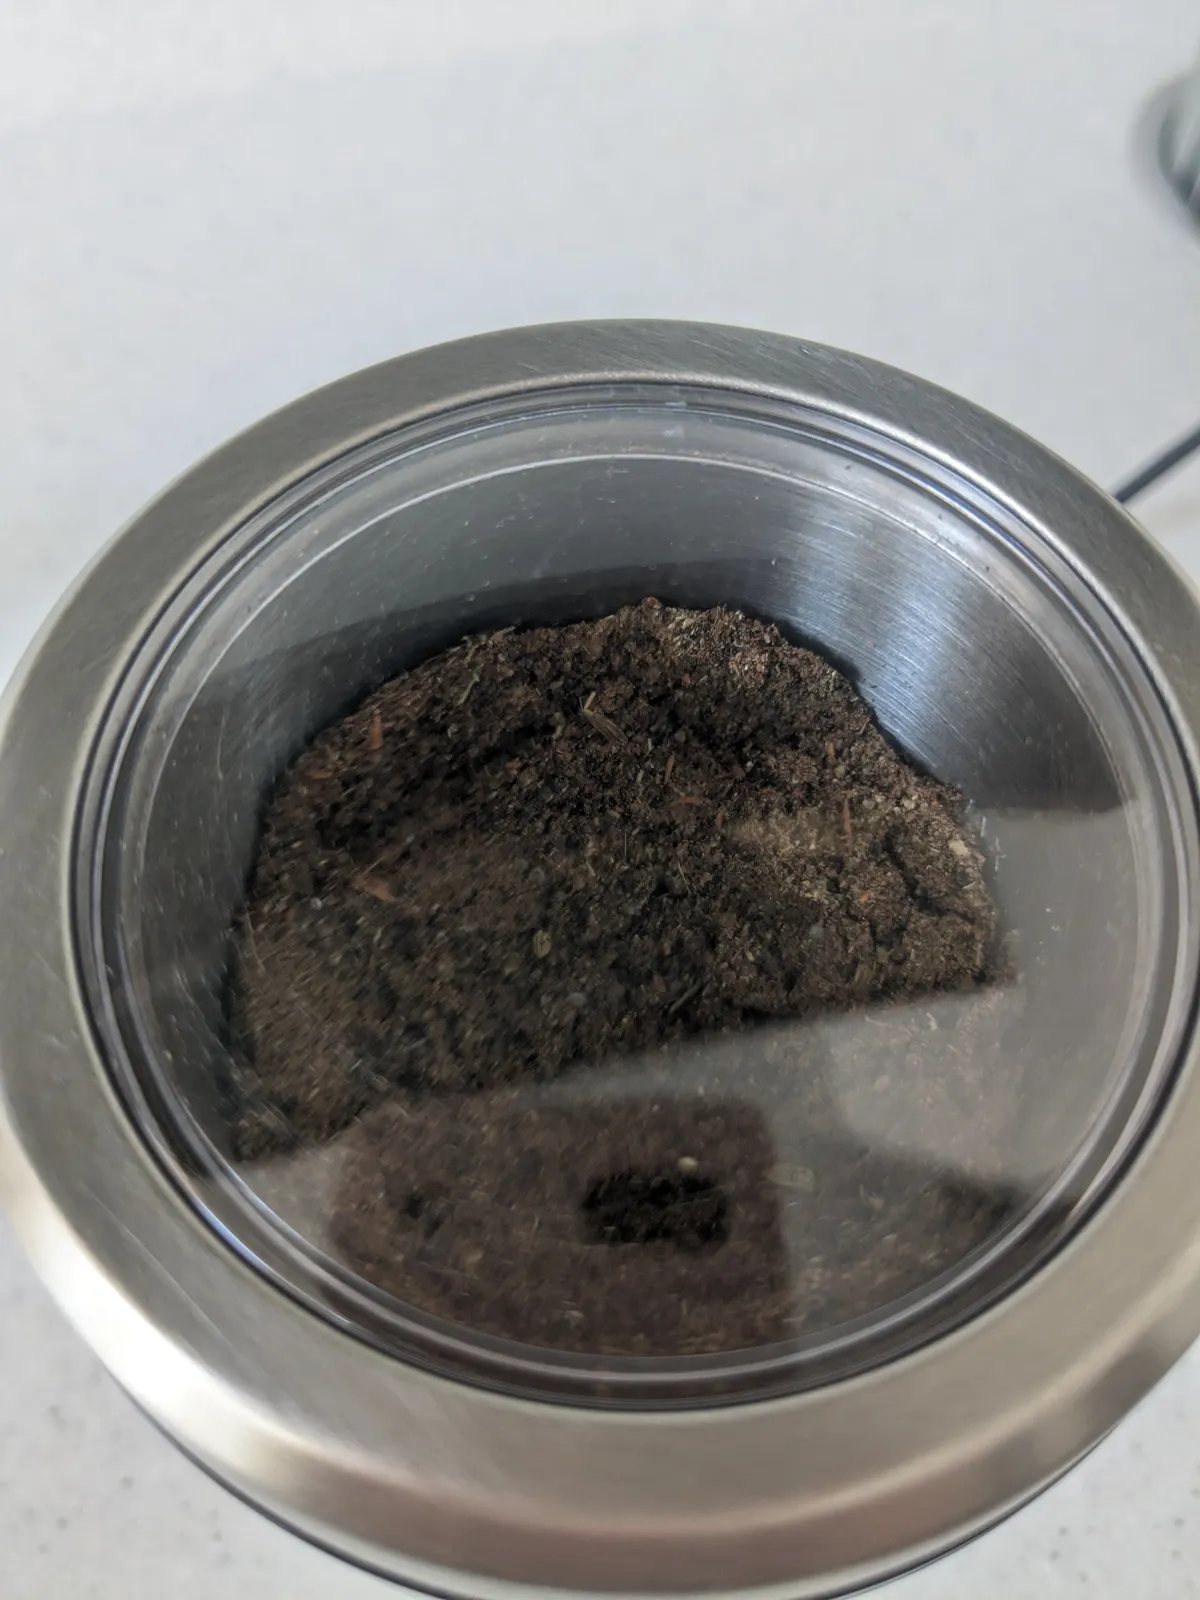 DR MILLS Electric Dried Spice Grinder